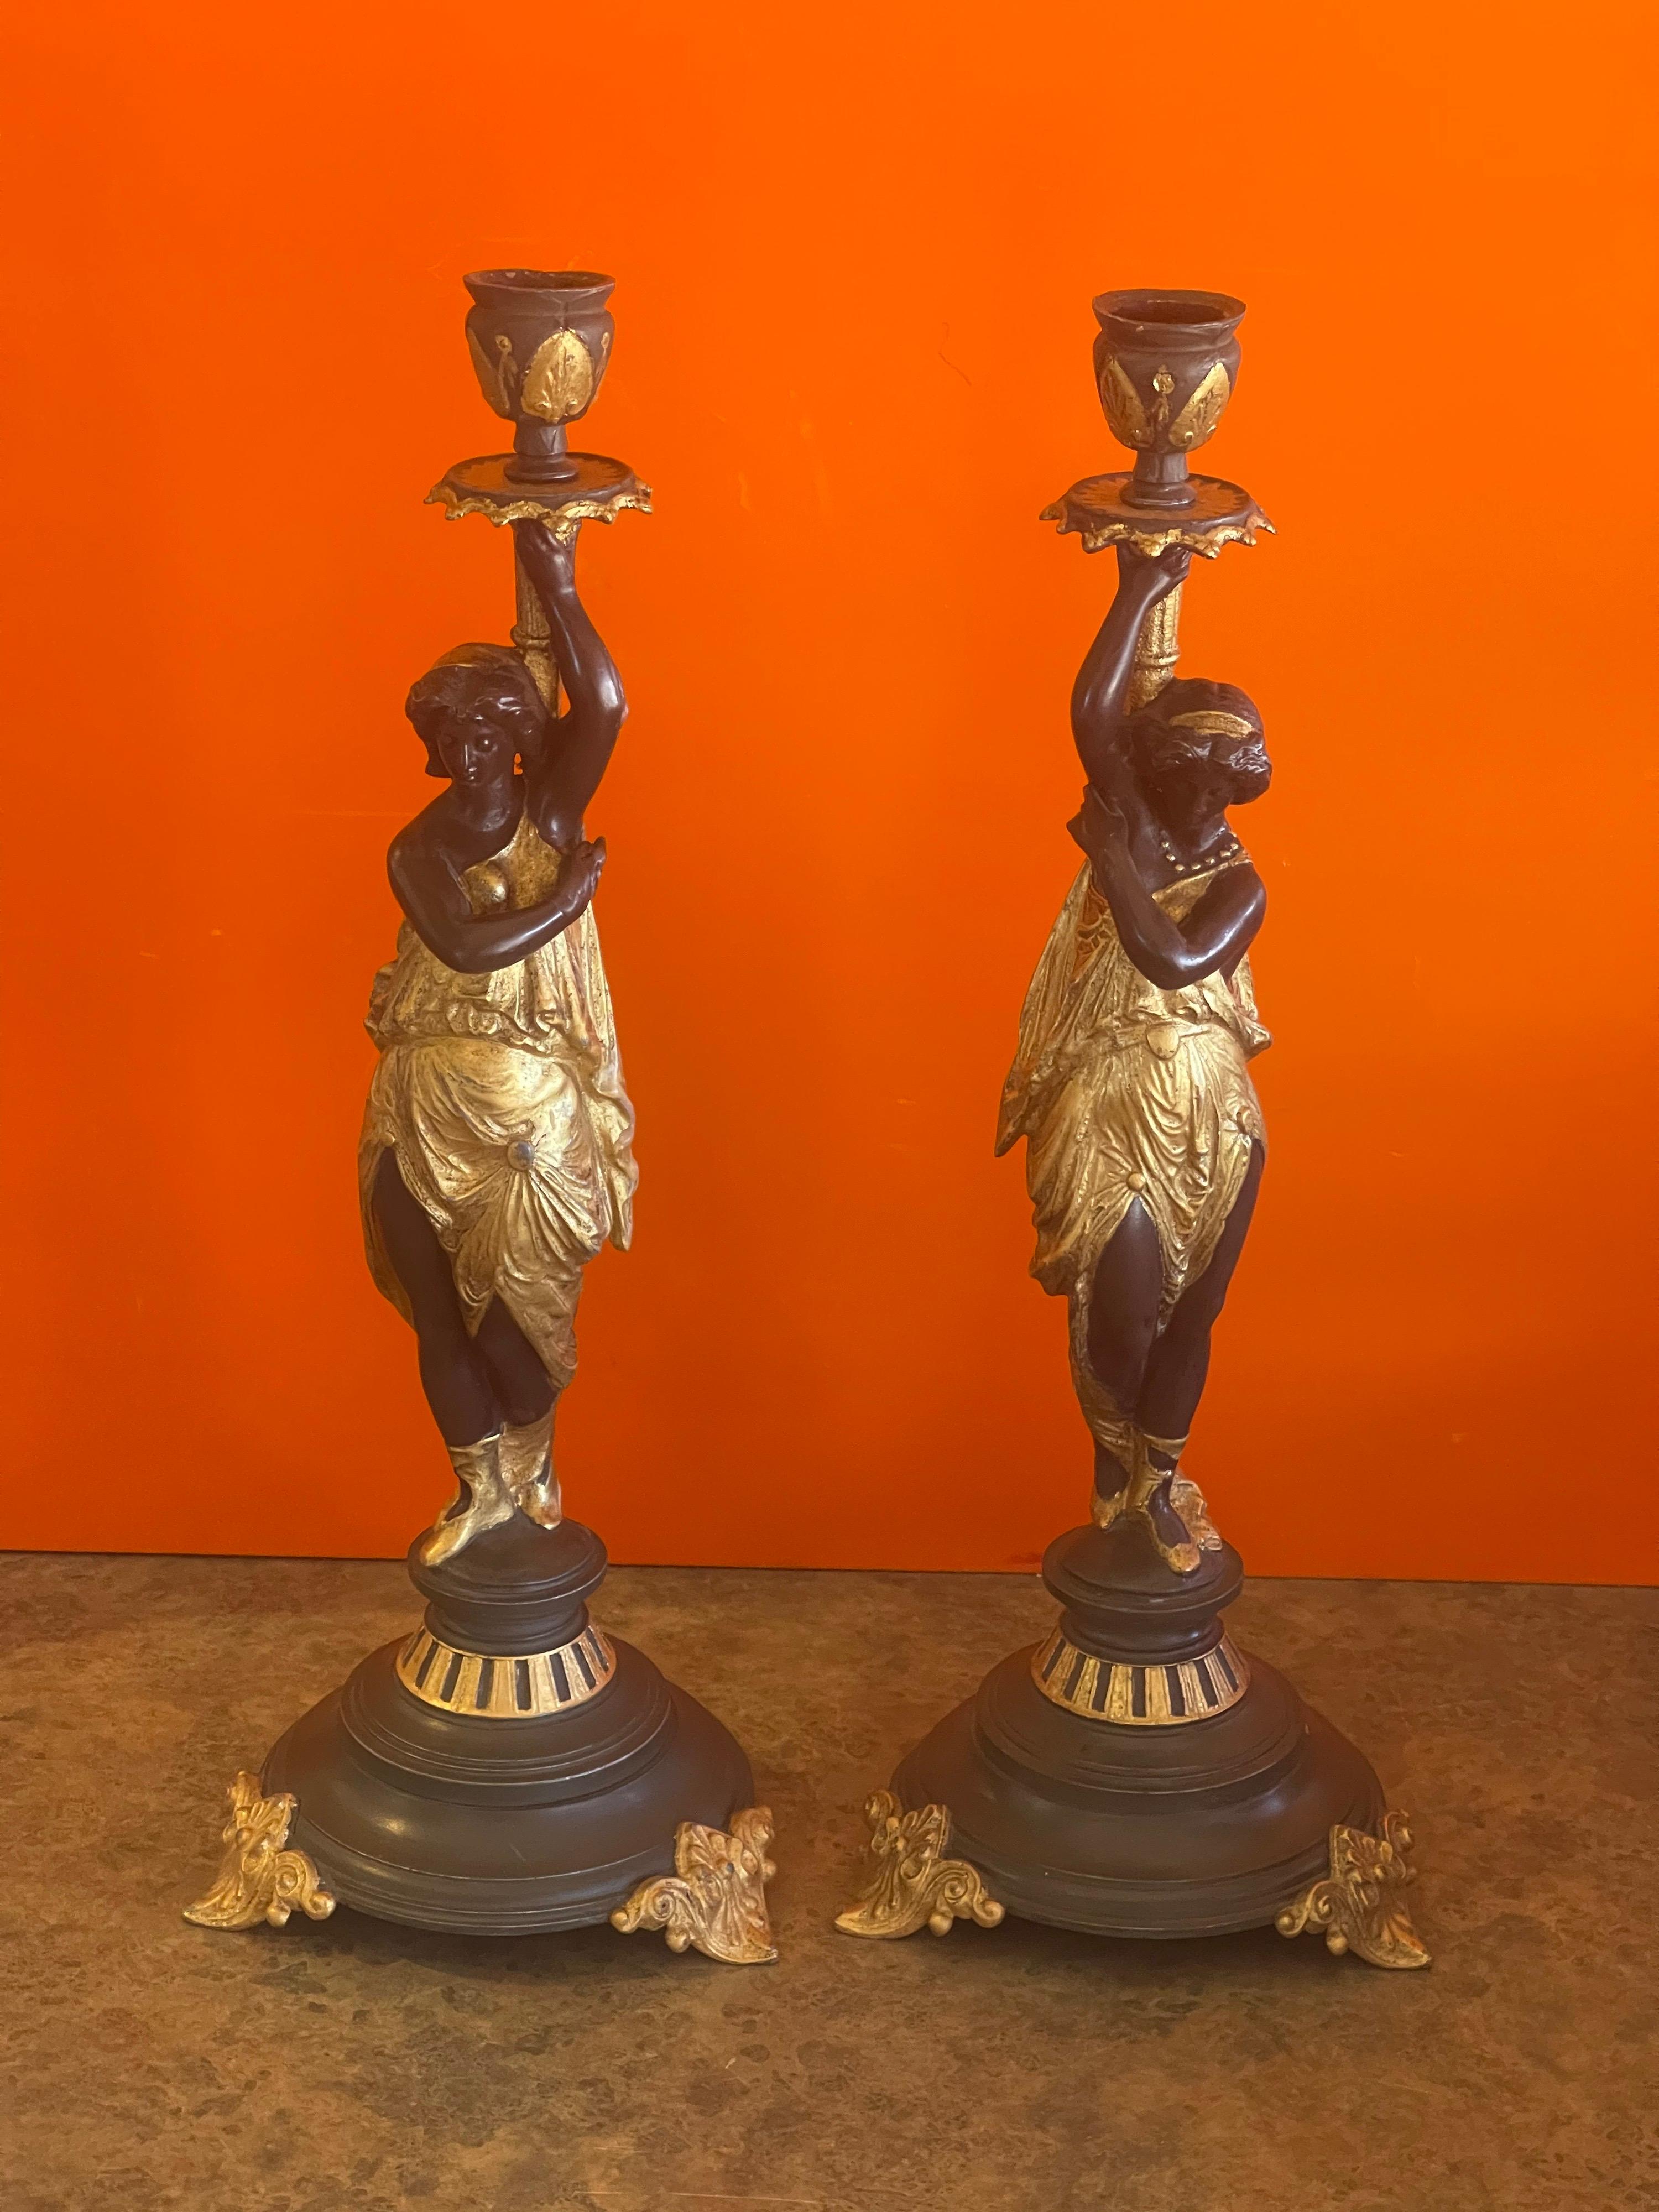 Elegant pair of antique gilt bronze figurative candlesticks, circa 1930s. The pair are in very good vintage condition with nice patination; they measure 5.5